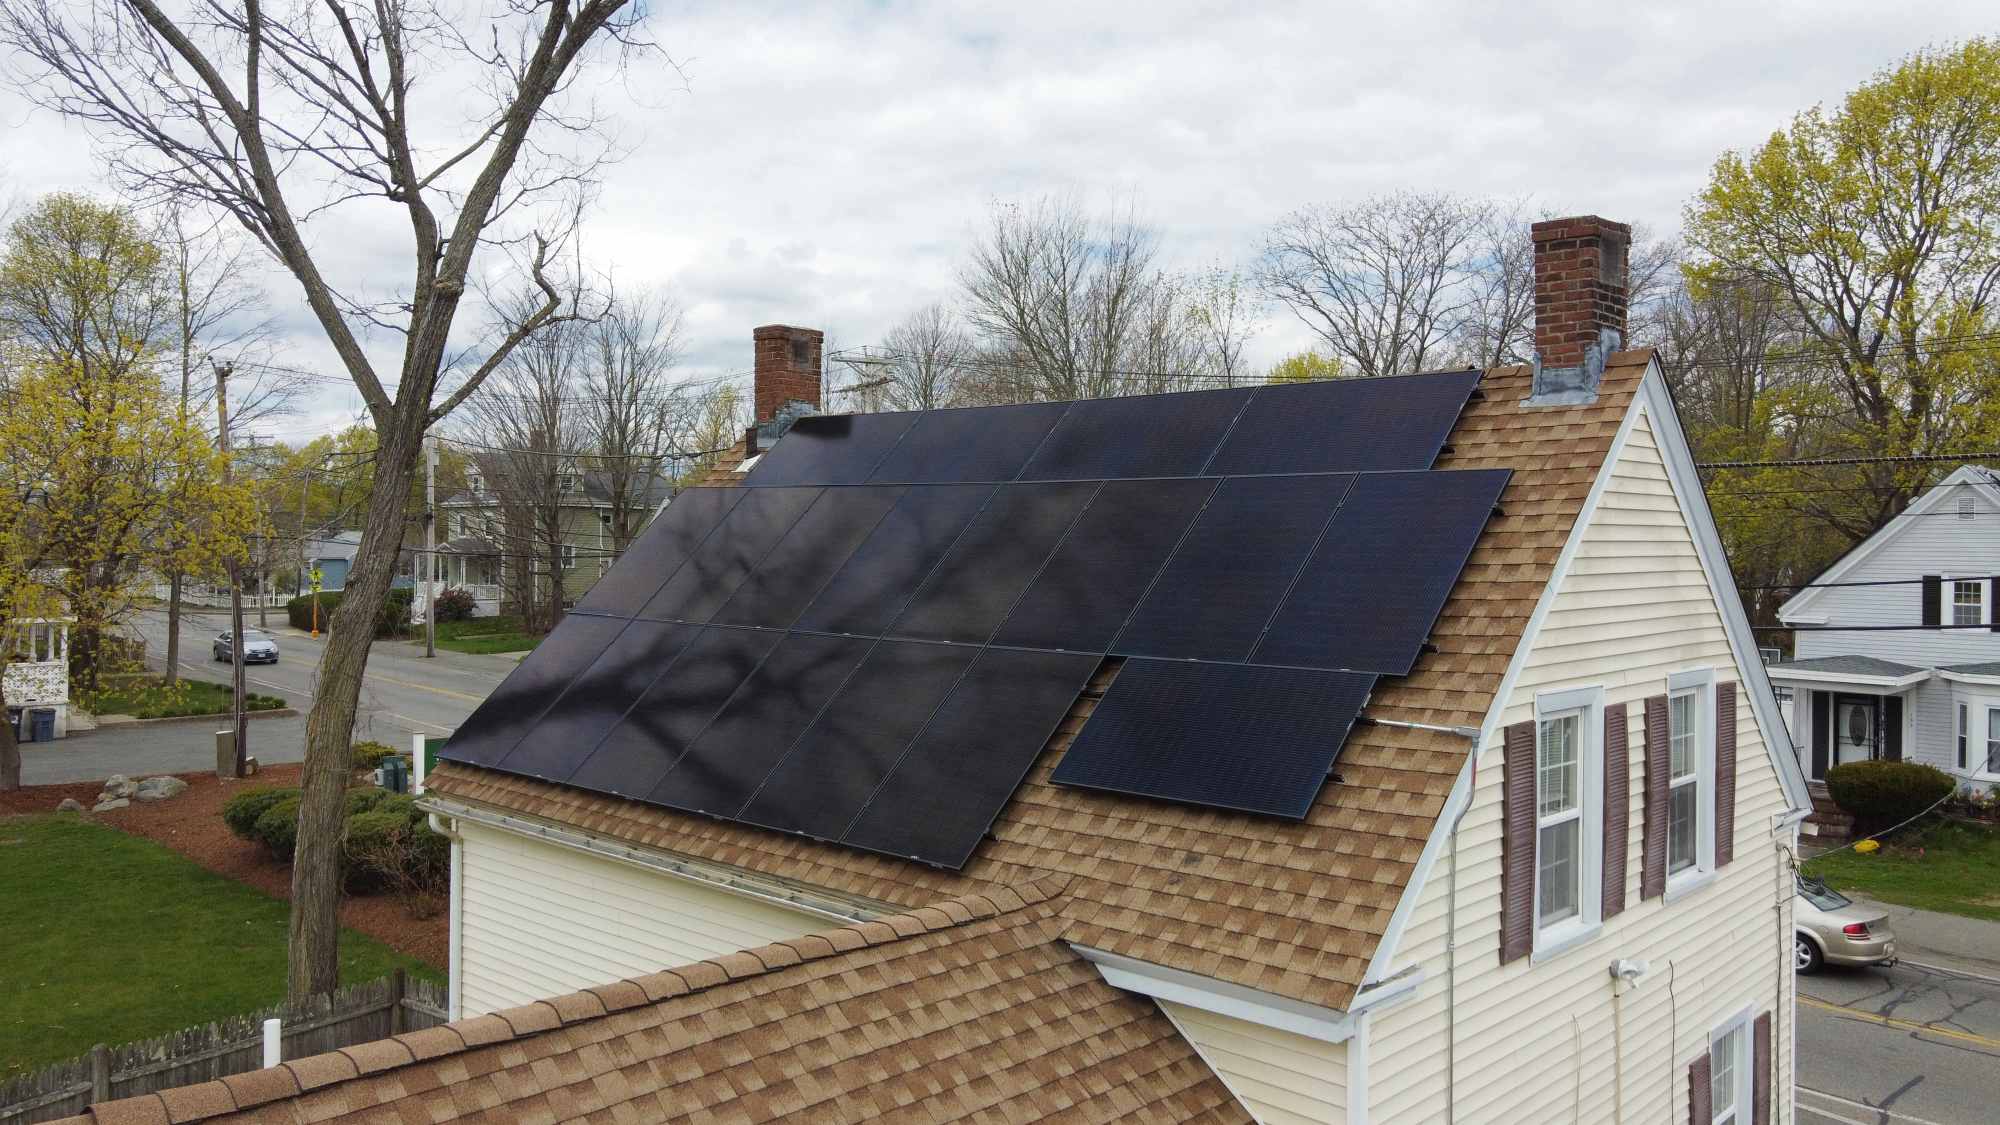 What’s Up With All The ”Free Solar Panel” Ads?